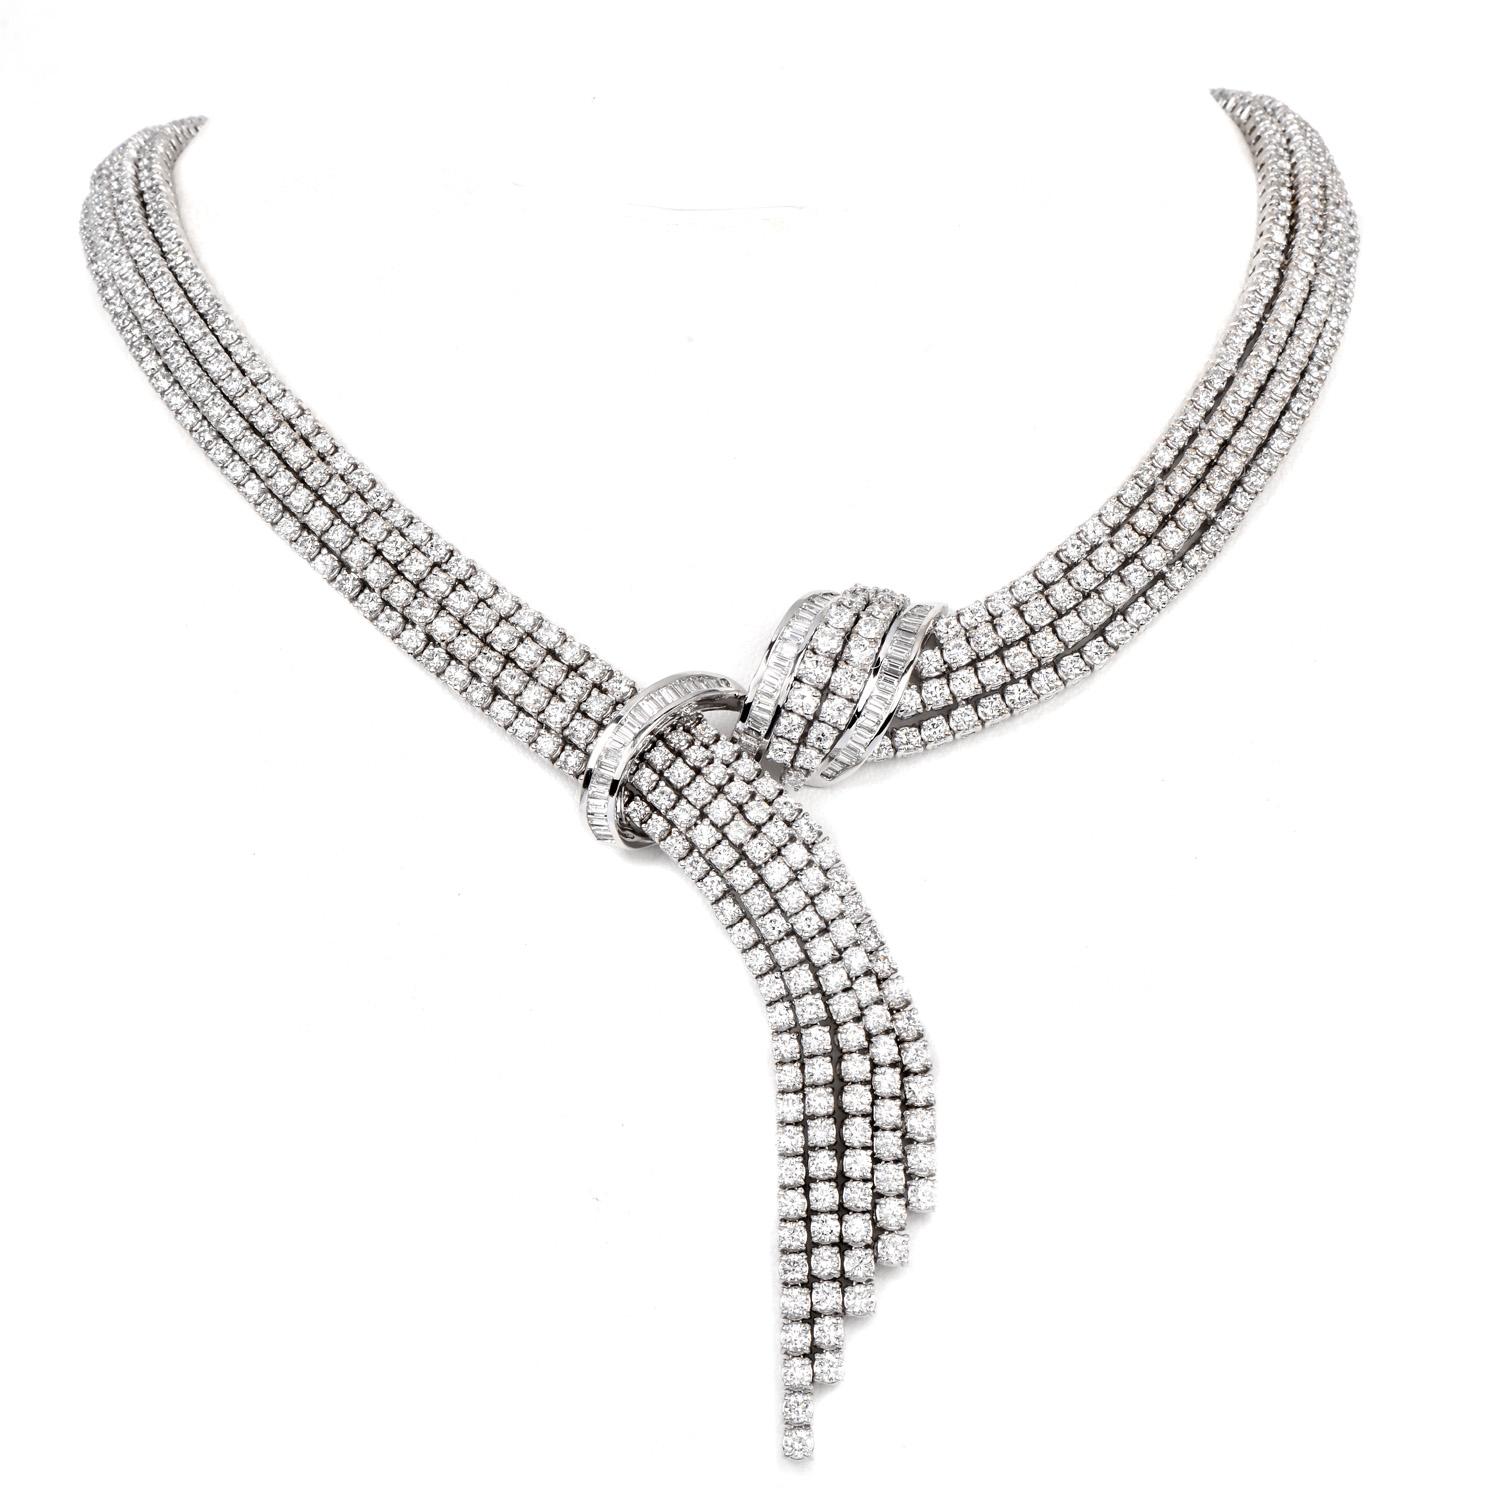 1980s Couture 45.80 carats 18K Gold Diamond Scarf Necklace  For Sale